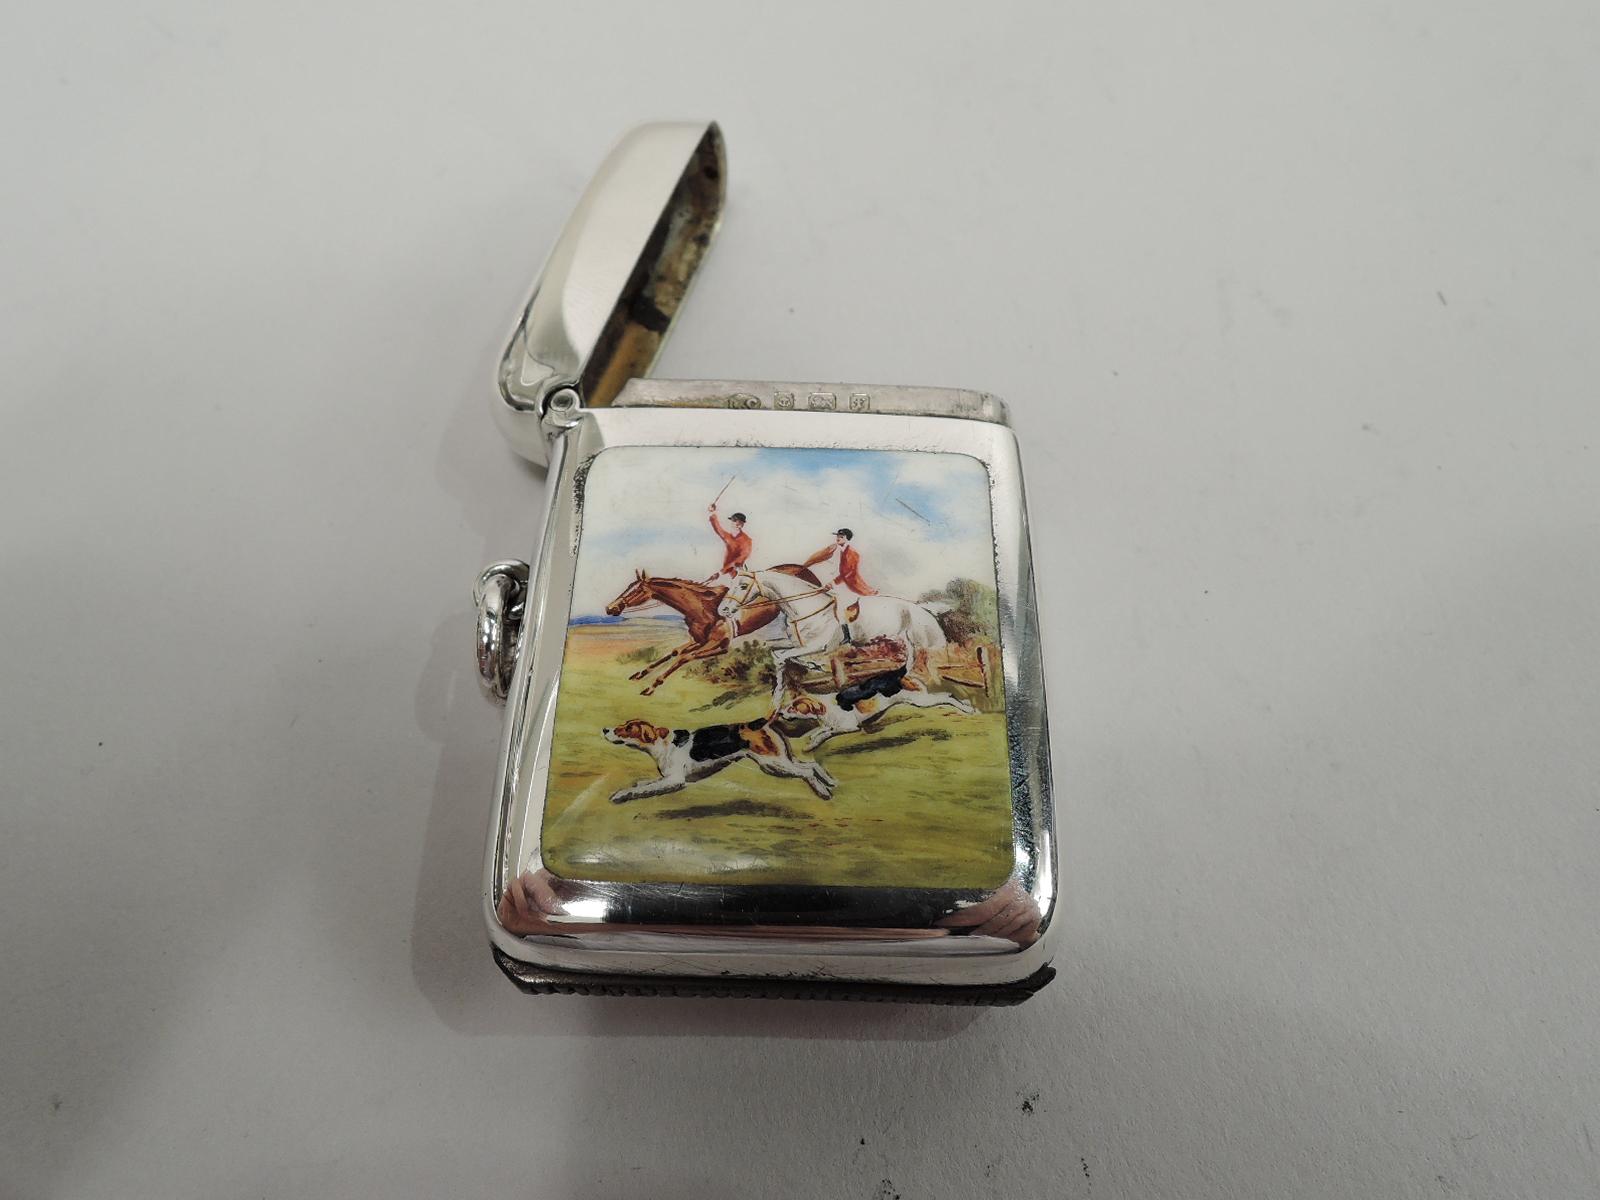 Edwardian sterling silver match safe. Made by Robert Chandler in Birmingham in 1905.Rectangular with hinged cover and curved corners. Bottom inset with strike. Loose-mounted ring. On front is enameled fox hunt scene with two riders taking a fence